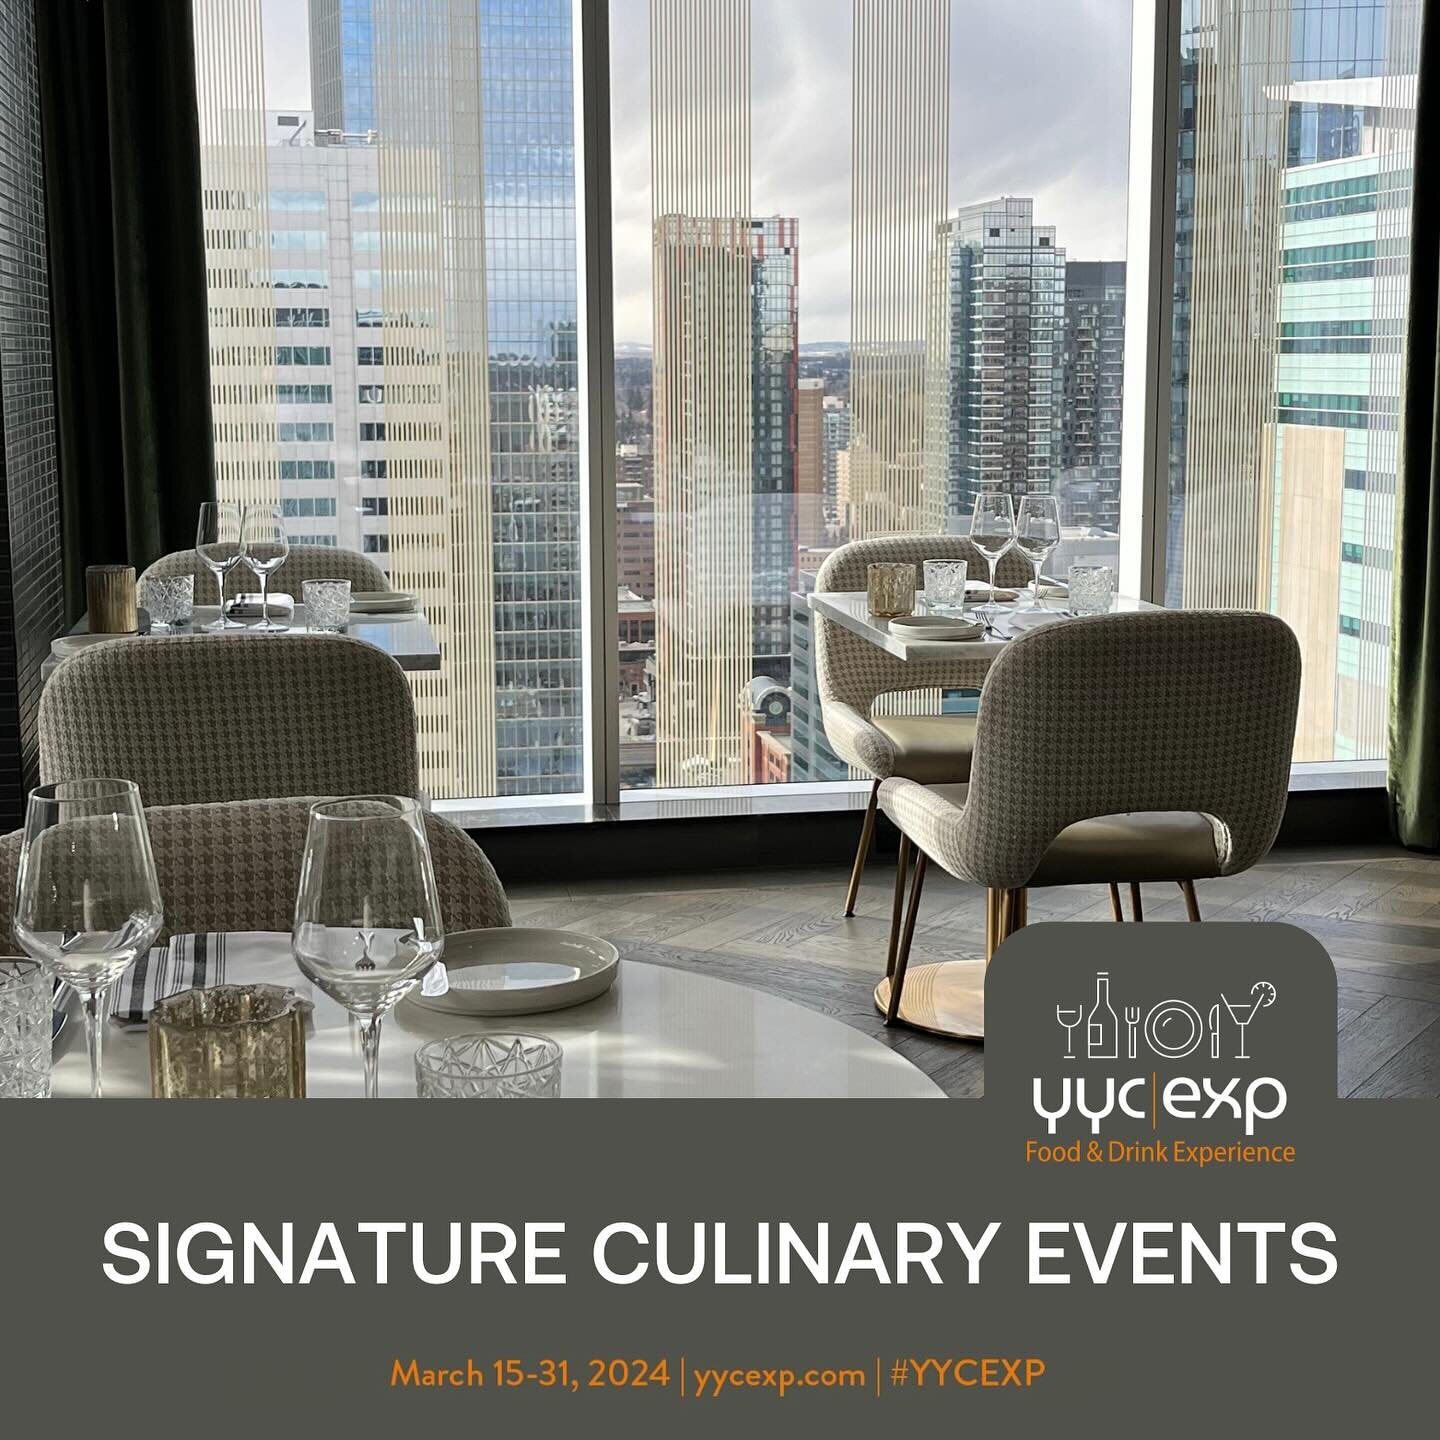 **GIVEAWAY** You have two more chances to attend a wonderful signature culinary event during this year&rsquo;s YYC Food &amp; Drink Experience!&nbsp;

March 28- &nbsp;Visit @thewilderooftop on Thursday, March 28 for the ultimate Knife Fight! The Cana